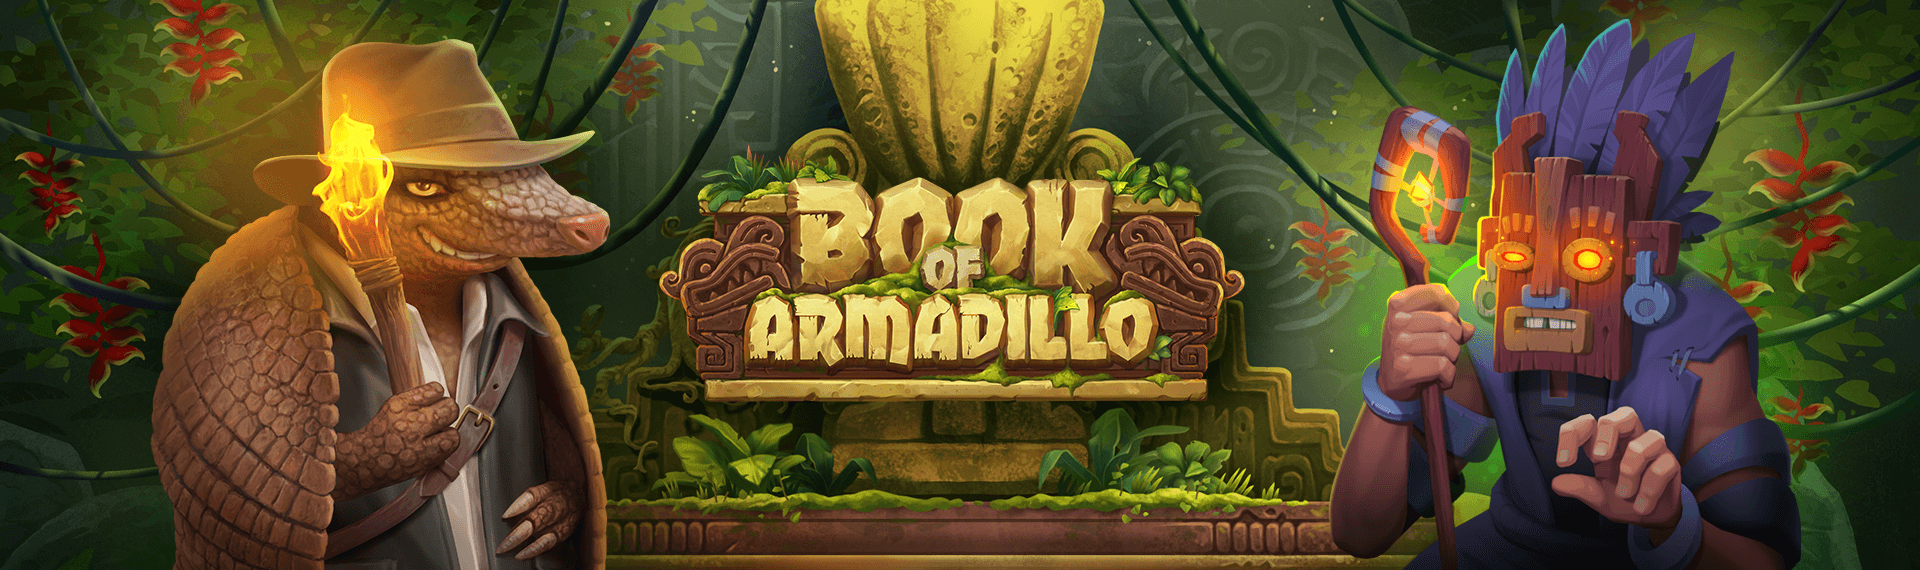 Book Of Armadillo Screenshot <br />
<b>Notice</b>:  Undefined variable: key in <b>/var/www/html/wp-content/themes/armadillo/page-game.php</b> on line <b>37</b><br />
1